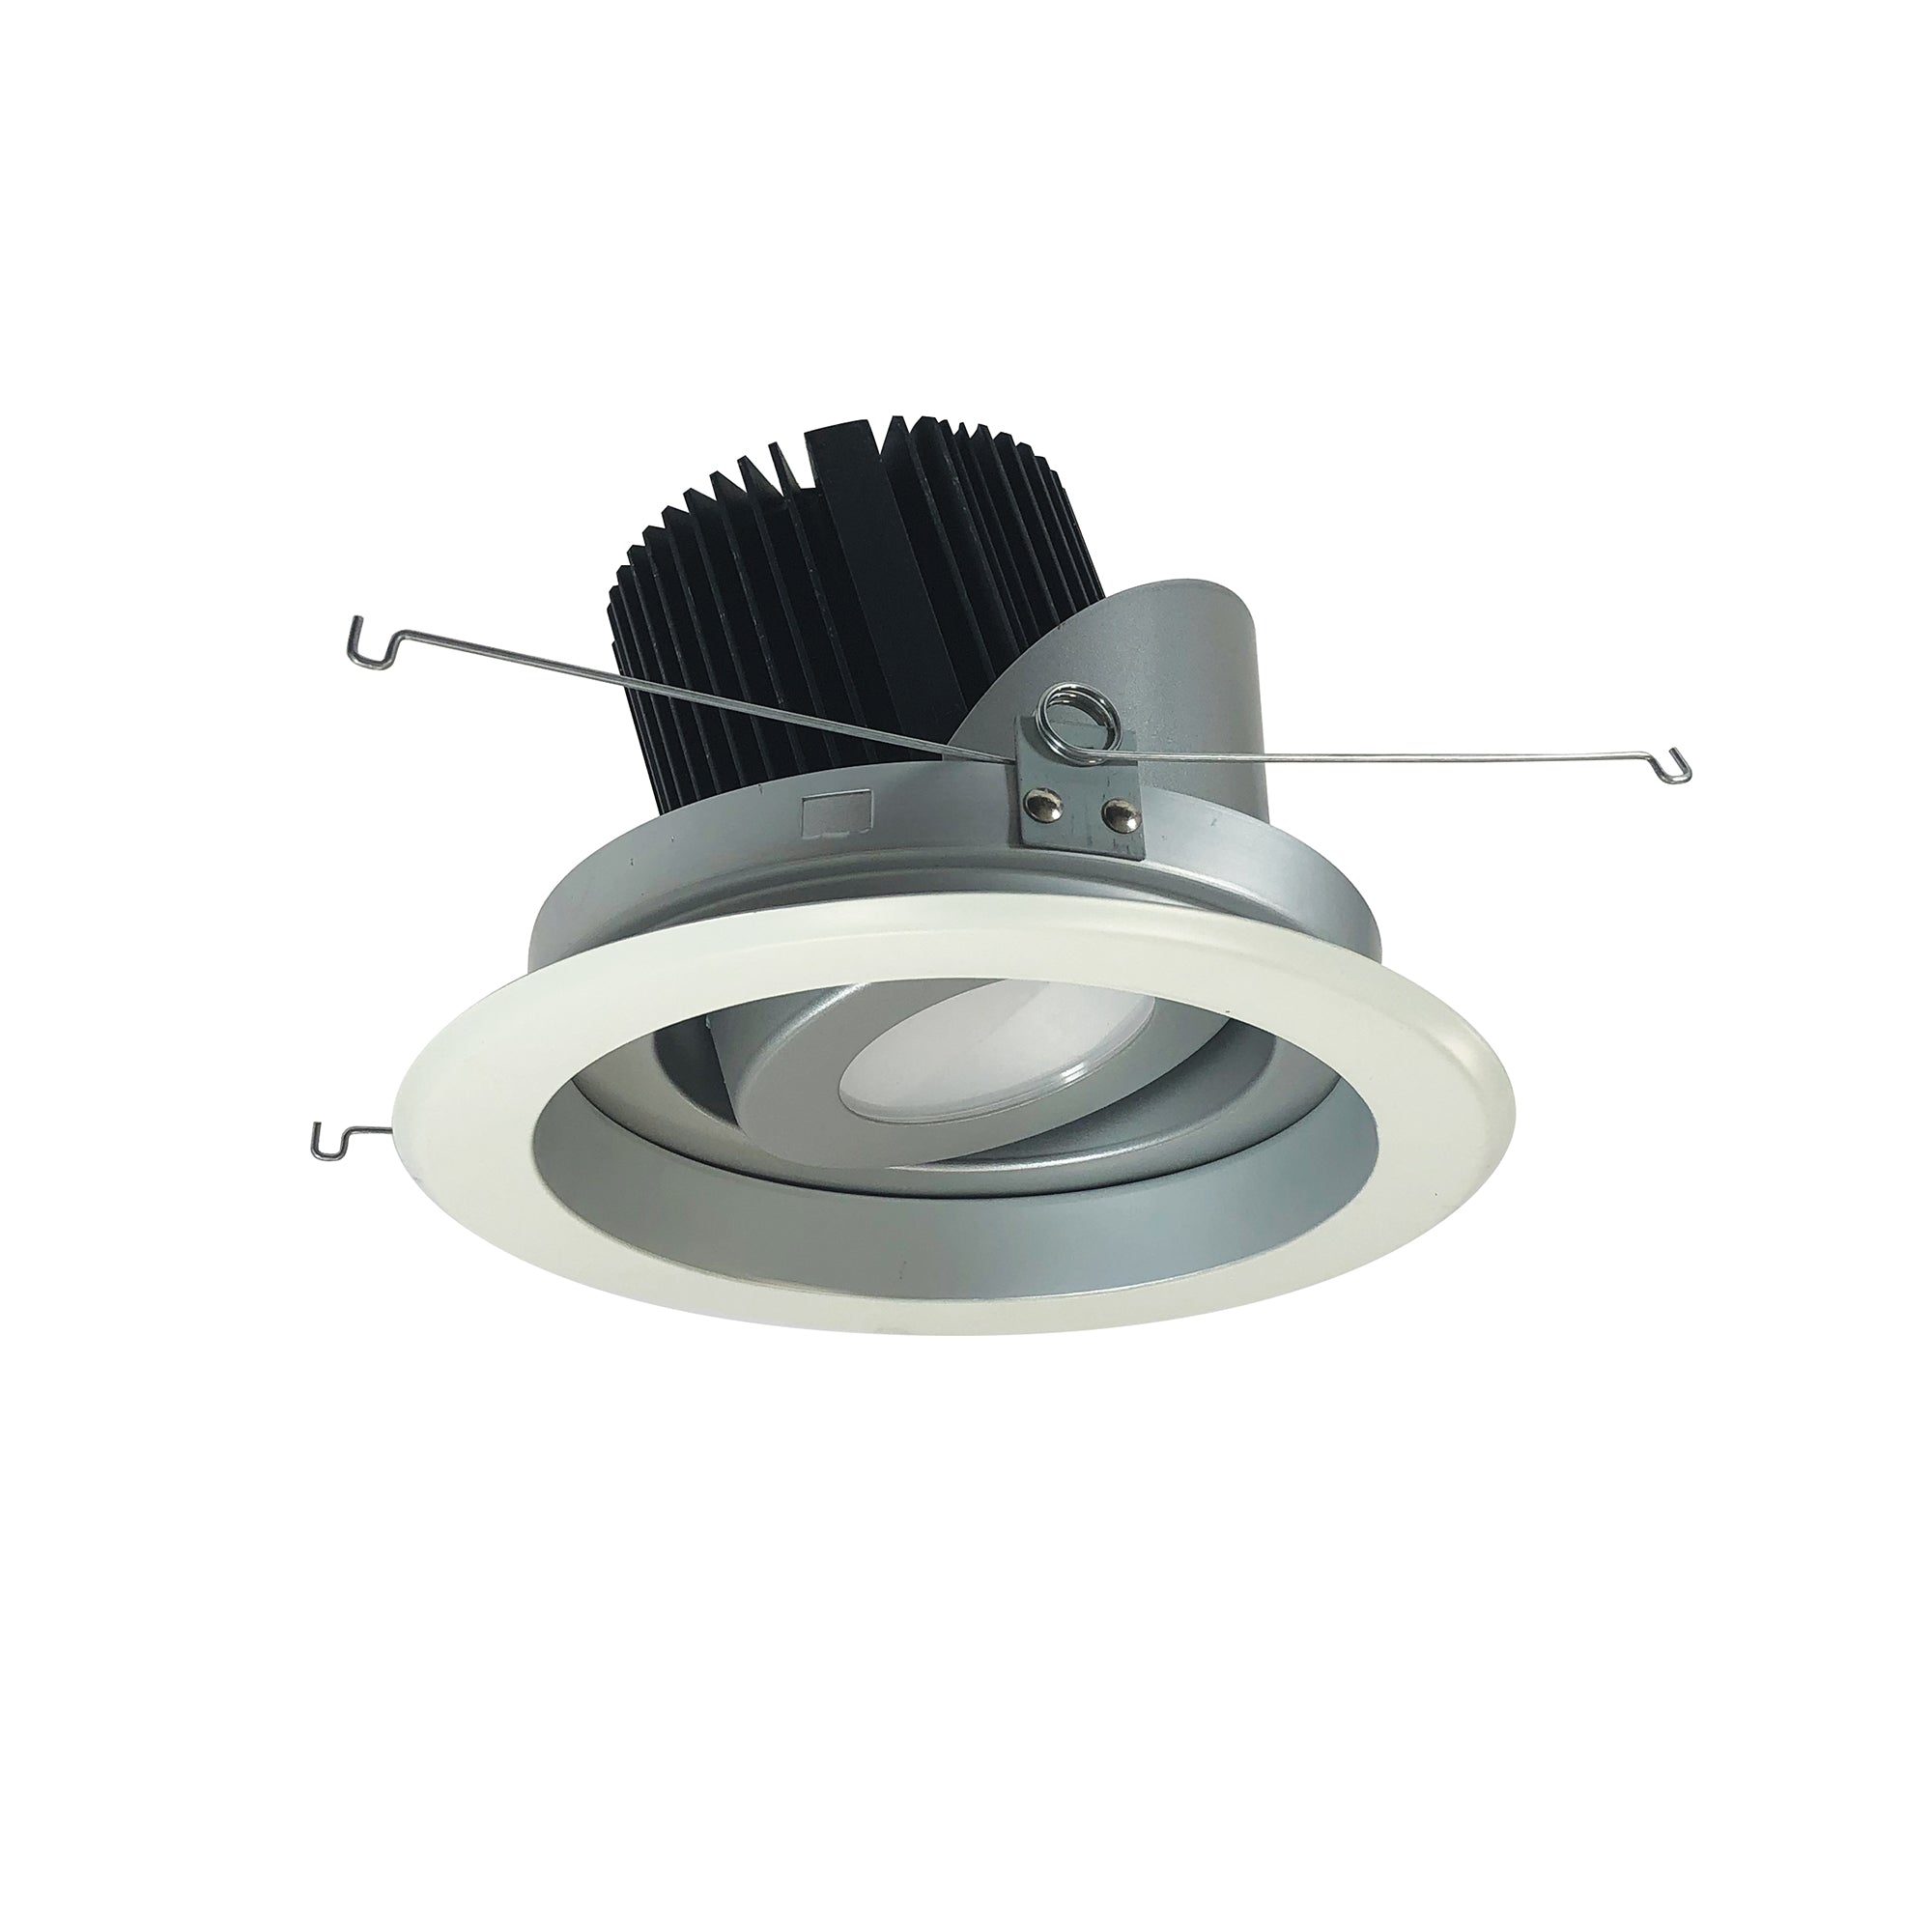 Nora Lighting NRM2-619L2530MHZW - Recessed - 6 Inch Marquise II Round Regressed Adj. Reflector, Medium Flood, 2500lm, 3000K, Haze/White (Not Compatible with NHRM2-625 Housings)